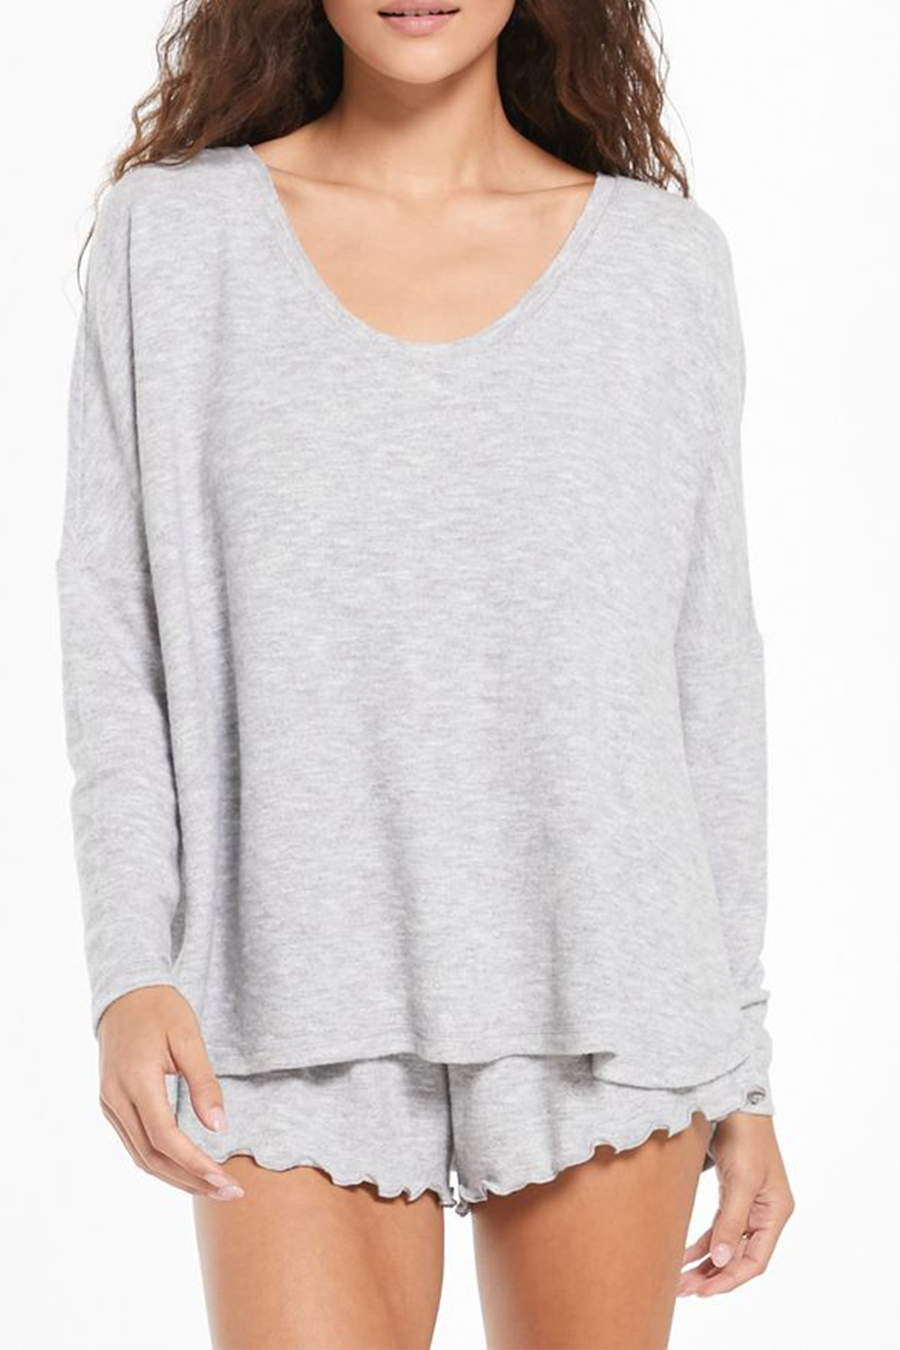 Hang Out Top | Heather Grey - Main Image Number 2 of 4